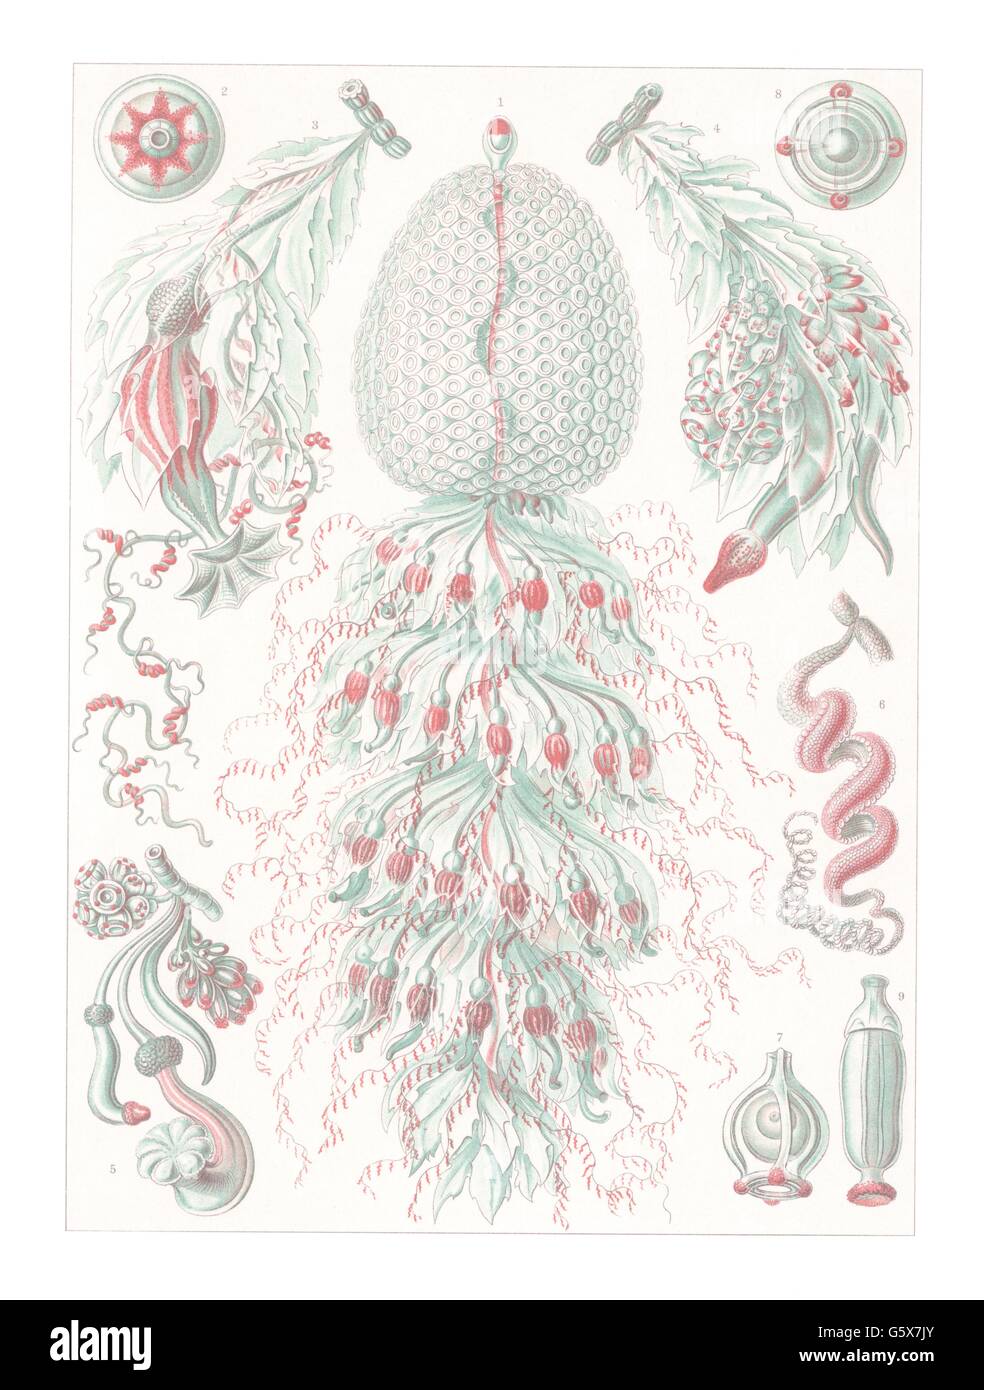 zoologie / Tiere, cnidaria, Siphonophores (Siphonophorae), Farblithographie, aus: Ernst Haeckel, 'Kunstformen der Natur', Leipzig - Wien, 1899 - 1904, Additional-Rights-Clearences-not available Stockfoto